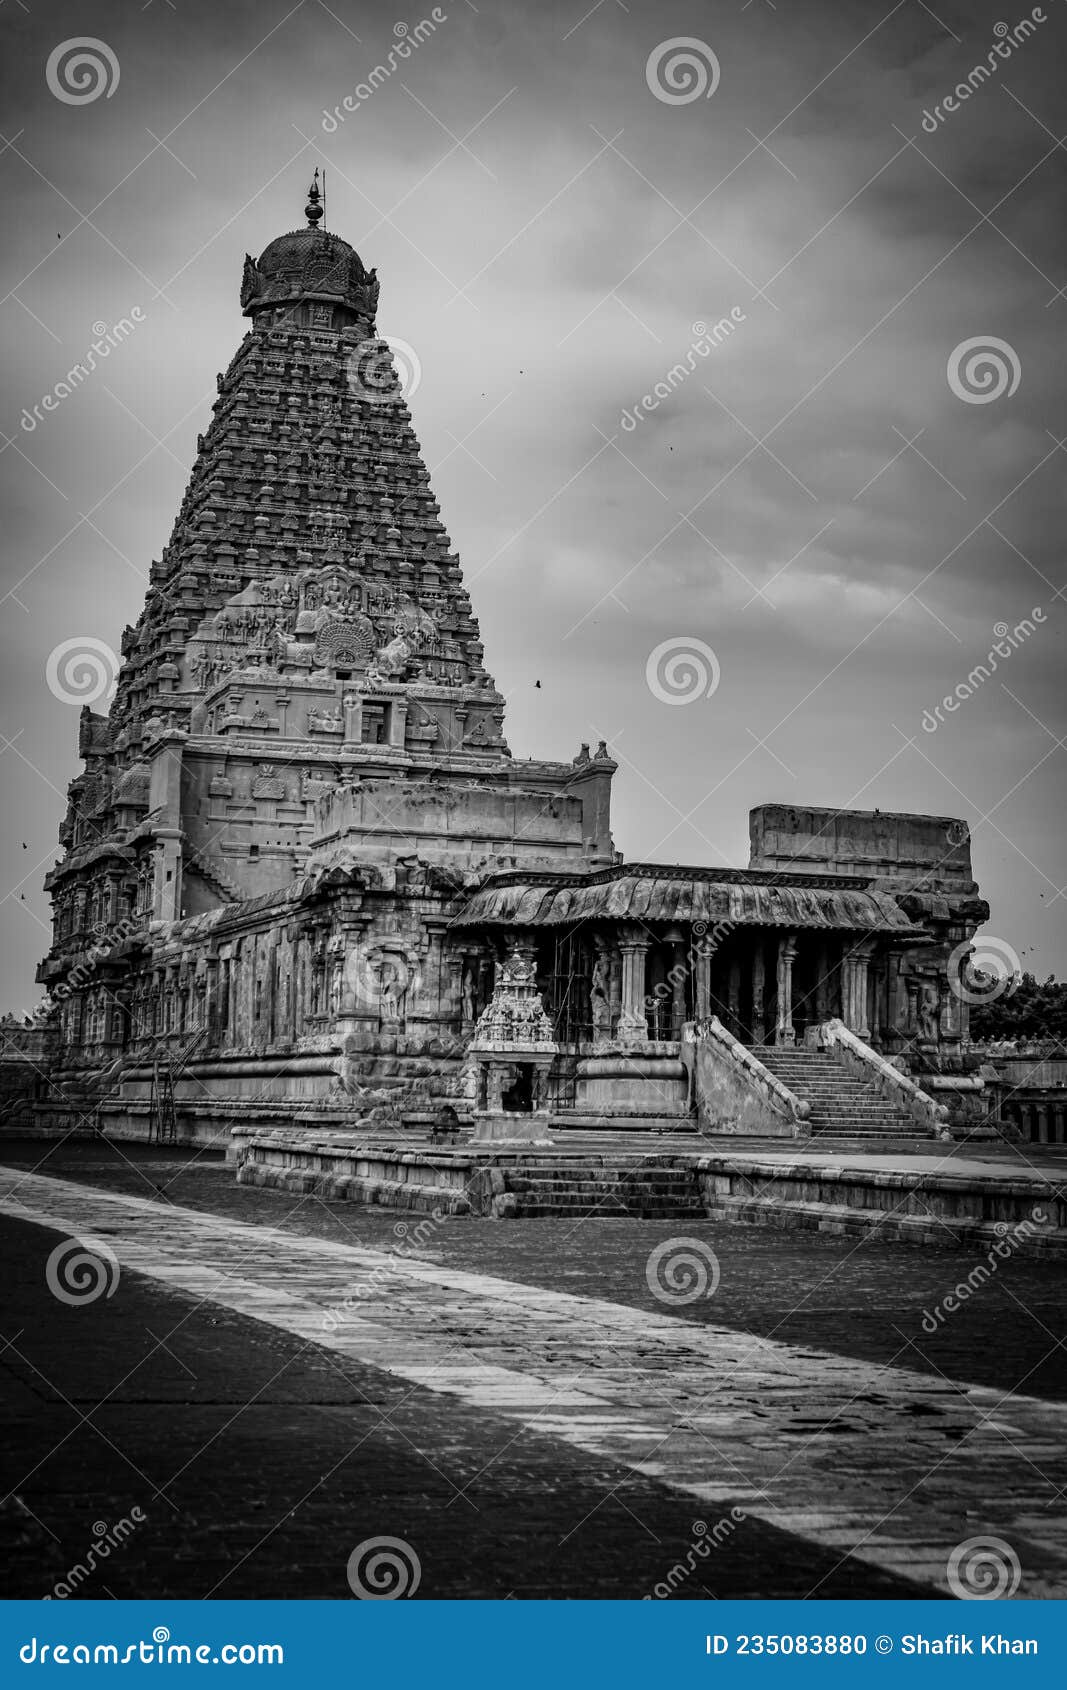 Brihadeshwara Temple A Structure Conceived With Grace And Magnificence   The Decor Journal India